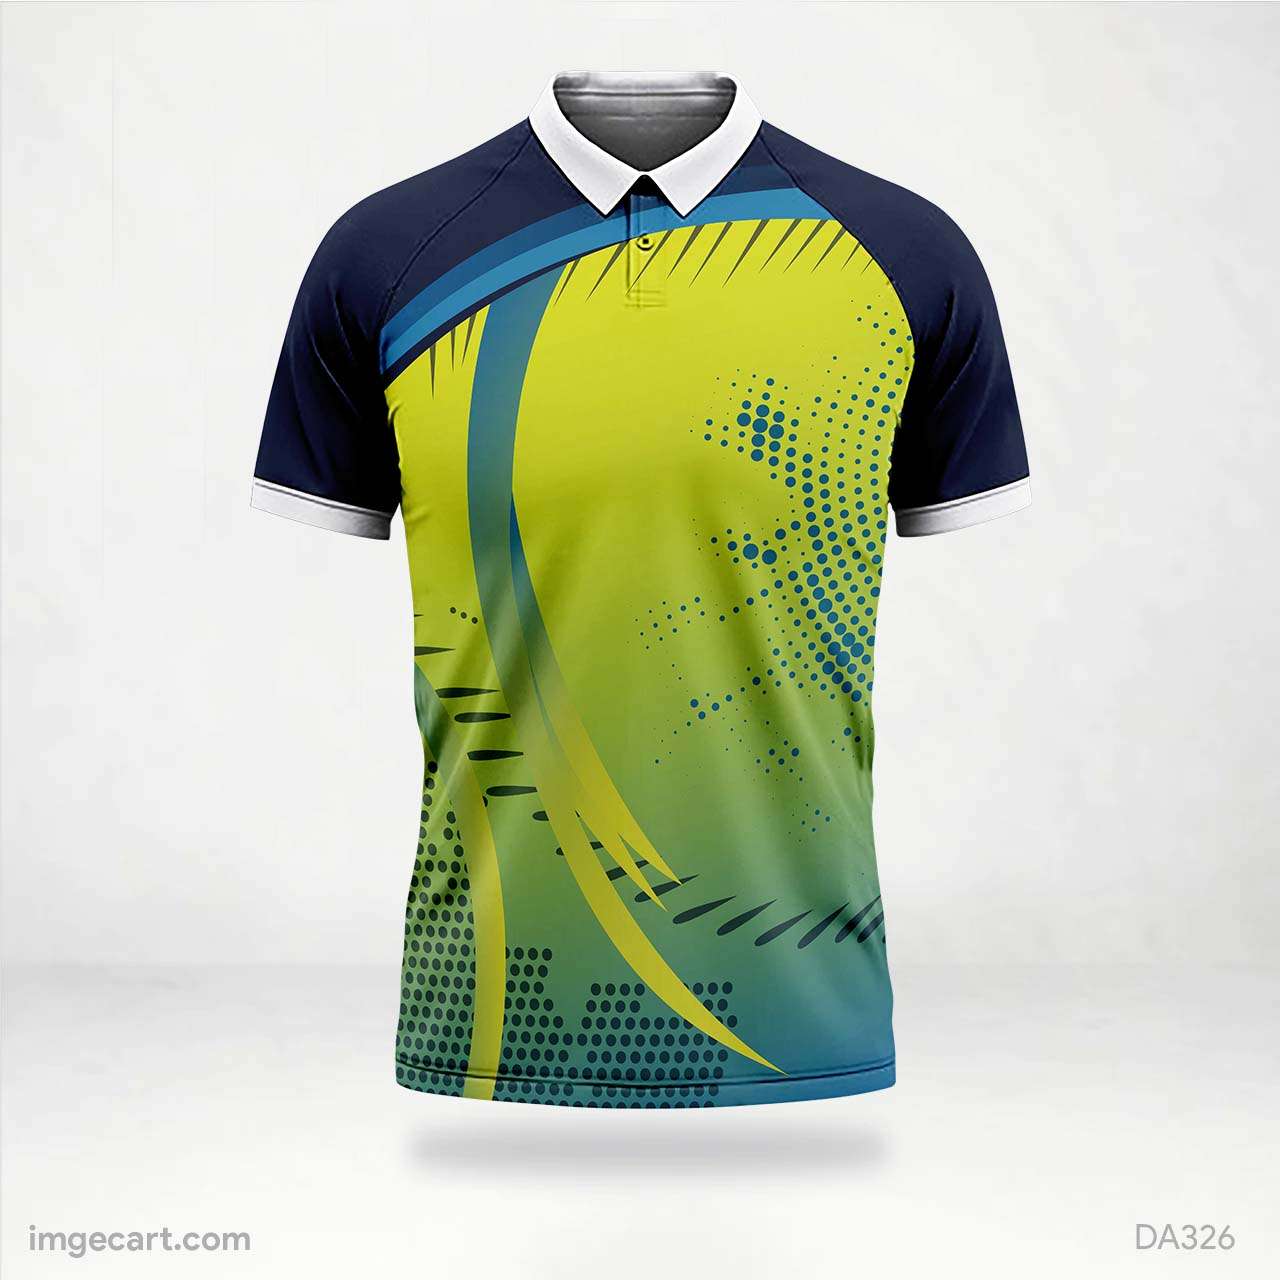 E-sports Jersey Design blue and yellow with pattern - imgecart